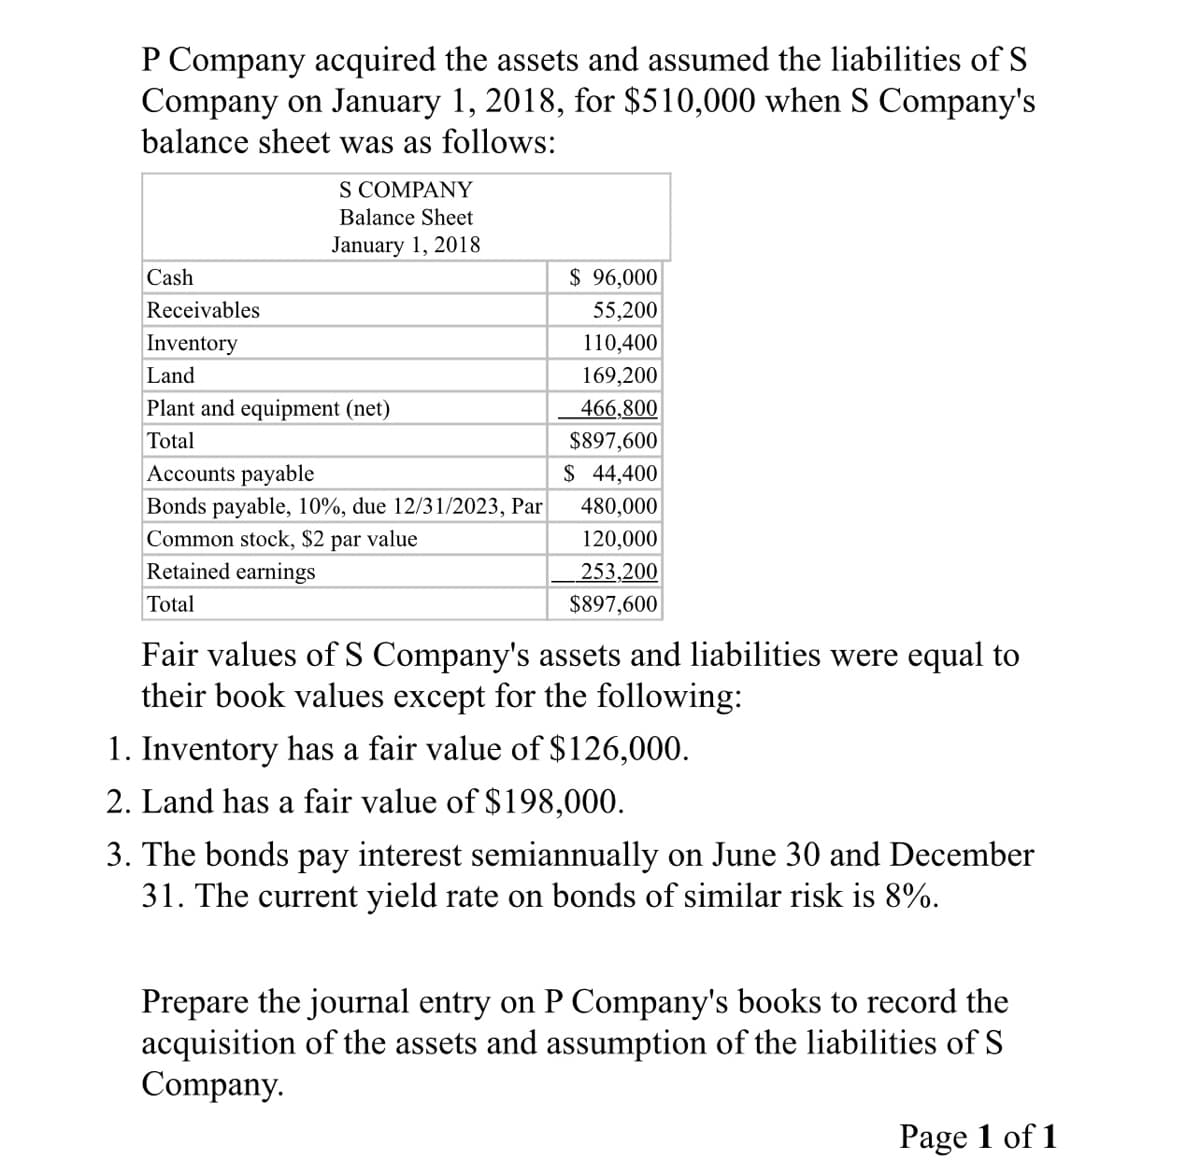 P Company acquired the assets and assumed the liabilities of S
Company on January 1, 2018, for $510,000 when S Company's
balance sheet was as follows:
S COMPANY
Balance Sheet
January 1, 2018
Cash
$ 96,000
Receivables
55,200
Inventory
110,400
Land
169,200
Plant and equipment (net)
466,800
Total
$897,600
Accounts payable
$ 44,400
Bonds payable, 10%, due 12/31/2023, Par
Common stock, $2 par value
480,000
120,000
Retained earnings
253,200
Total
$897,600
Fair values of S Company's assets and liabilities were equal to
their book values except for the following:
1. Inventory has a fair value of $126,000.
2. Land has a fair value of $198,000.
3. The bonds pay interest semiannually on June 30 and December
31. The current yield rate on bonds of similar risk is 8%.
Prepare the journal entry on P Company's books to record the
acquisition of the assets and assumption of the liabilities of S
Company.
Page 1 of 1
